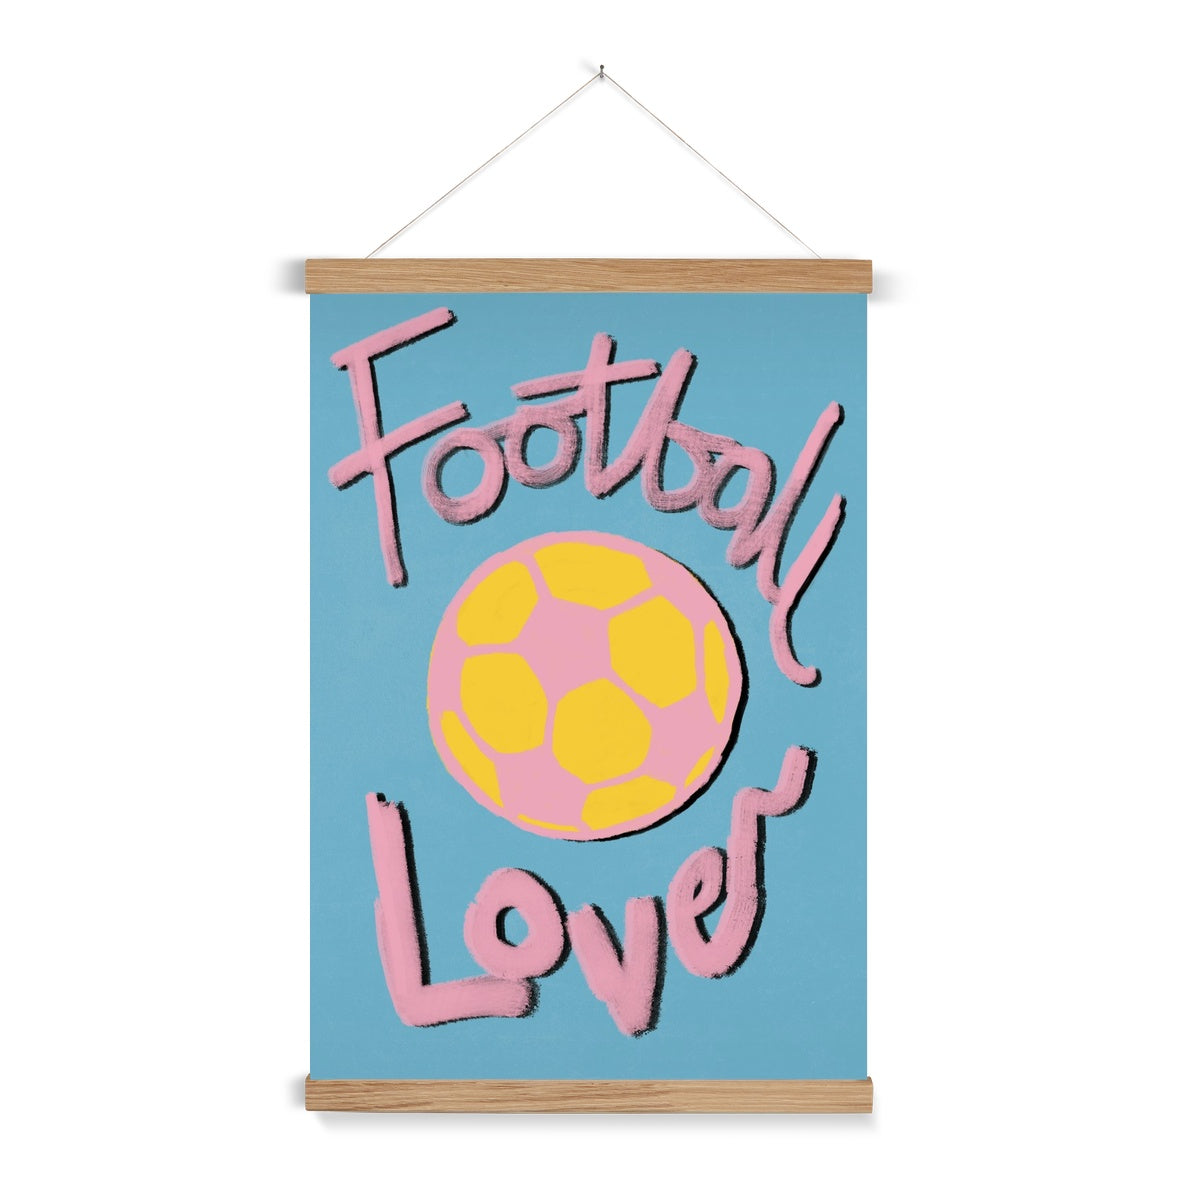 Football Lover Print - Blue, Yellow, Pink Fine Art Print with Hanger